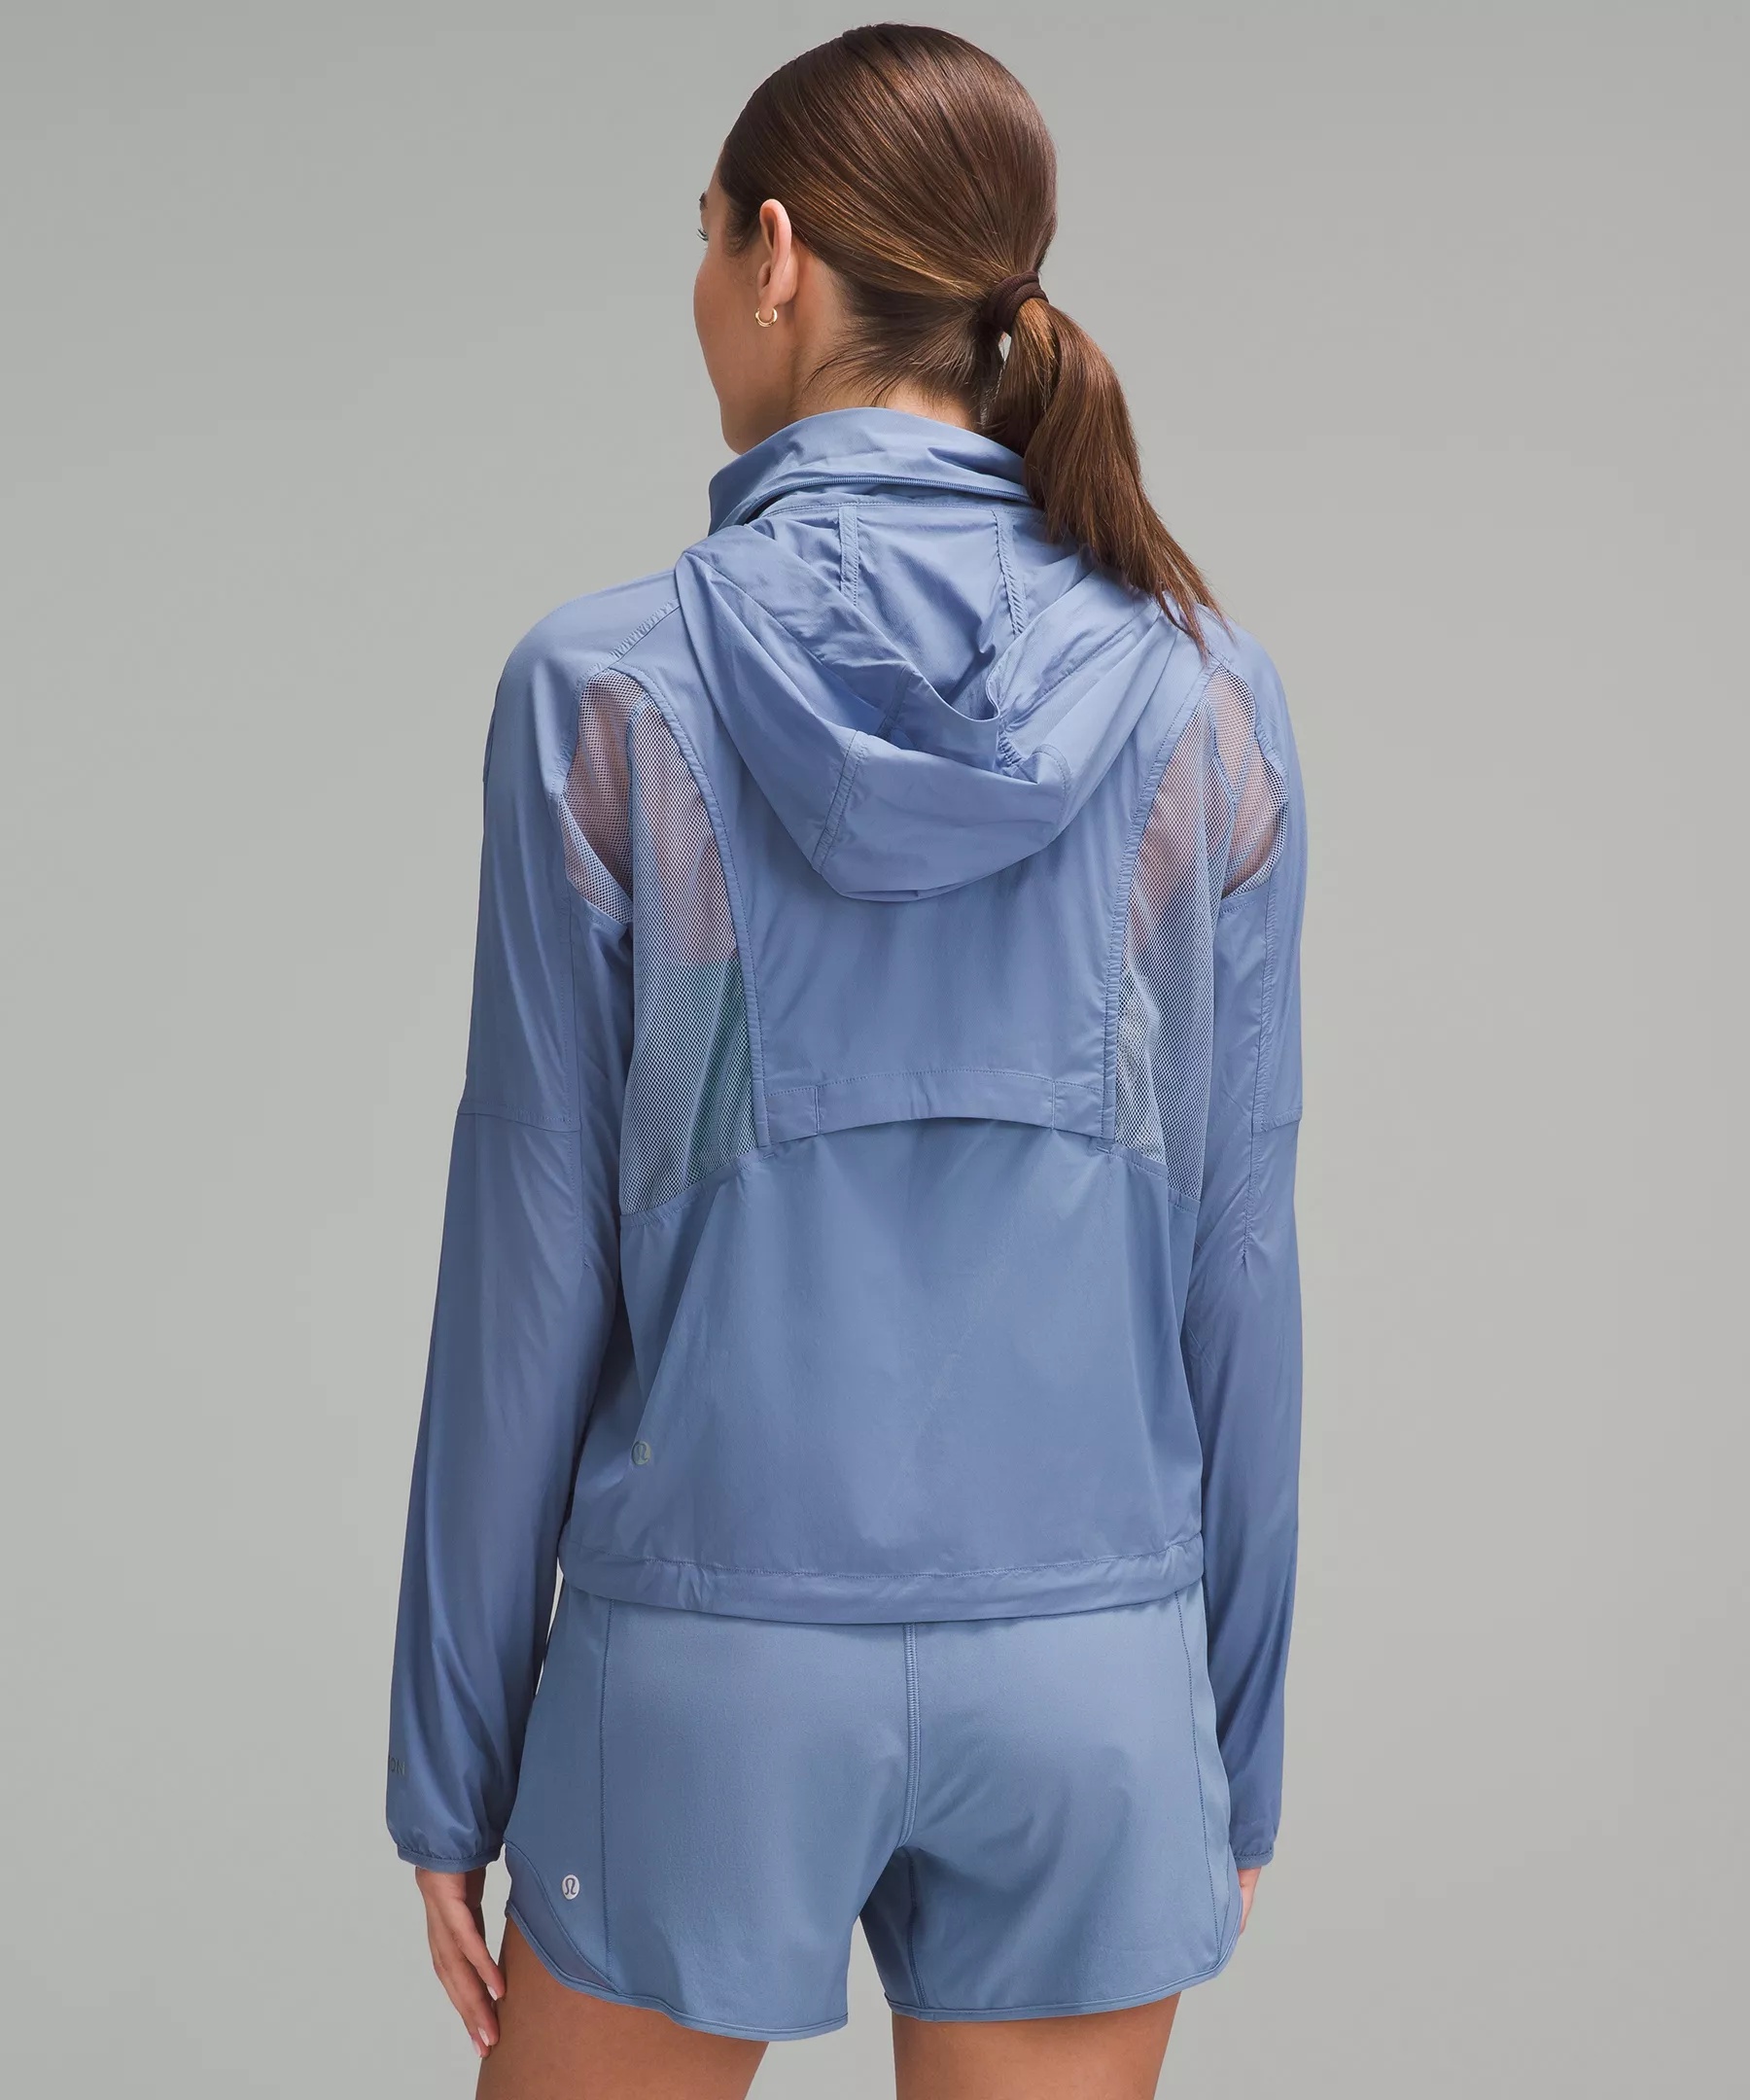 Classic-Fit Ventilated Running Jacket - 3